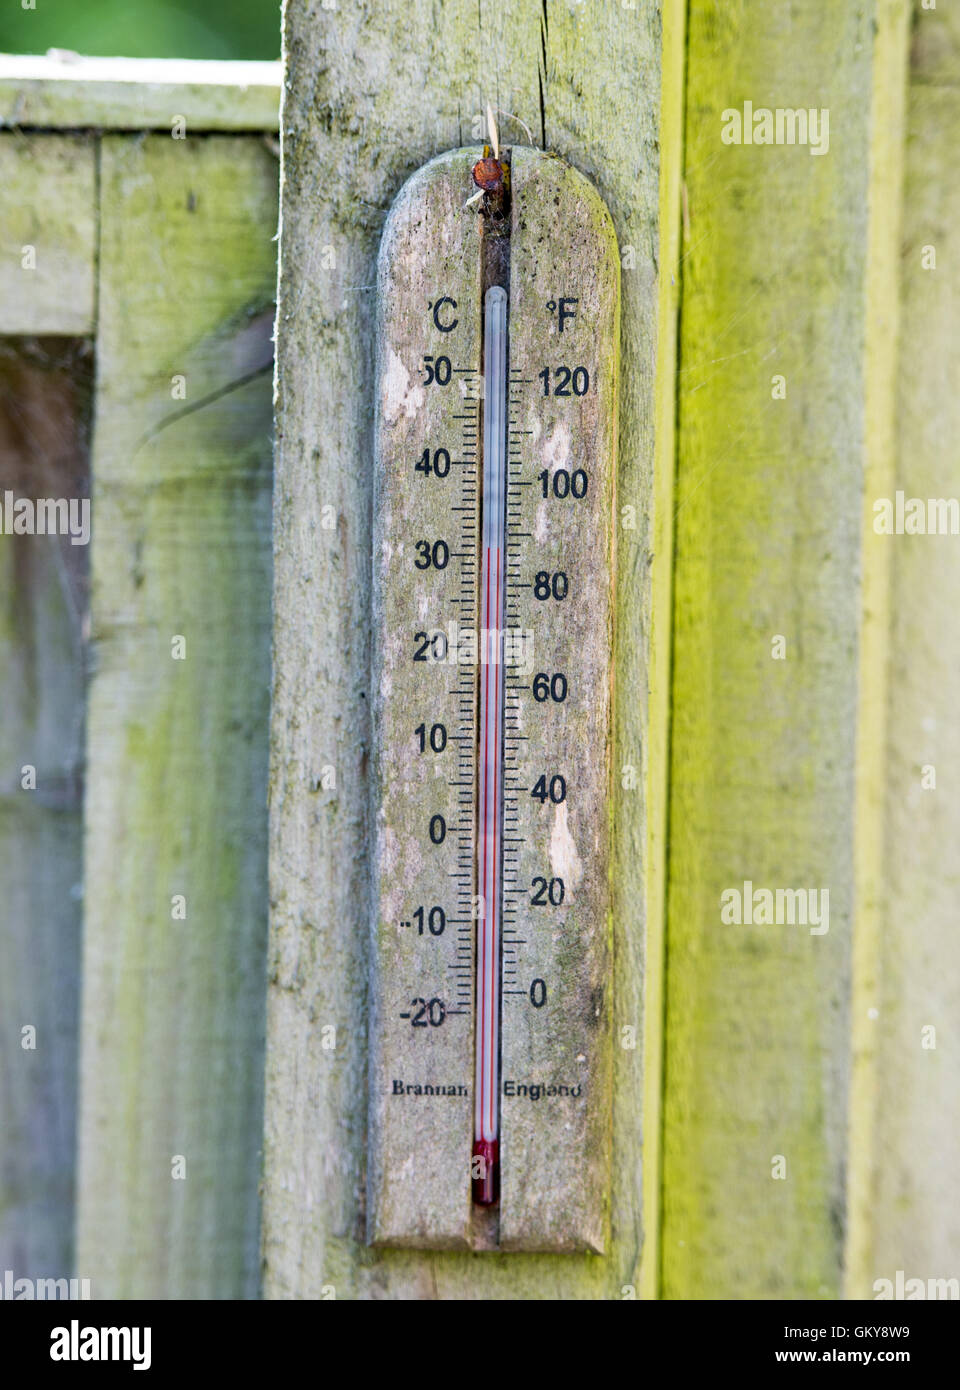 https://c8.alamy.com/comp/GKY8W9/brighton-uk-24th-aug-2016-a-thermometer-reads-32-degrees-centigrade-GKY8W9.jpg